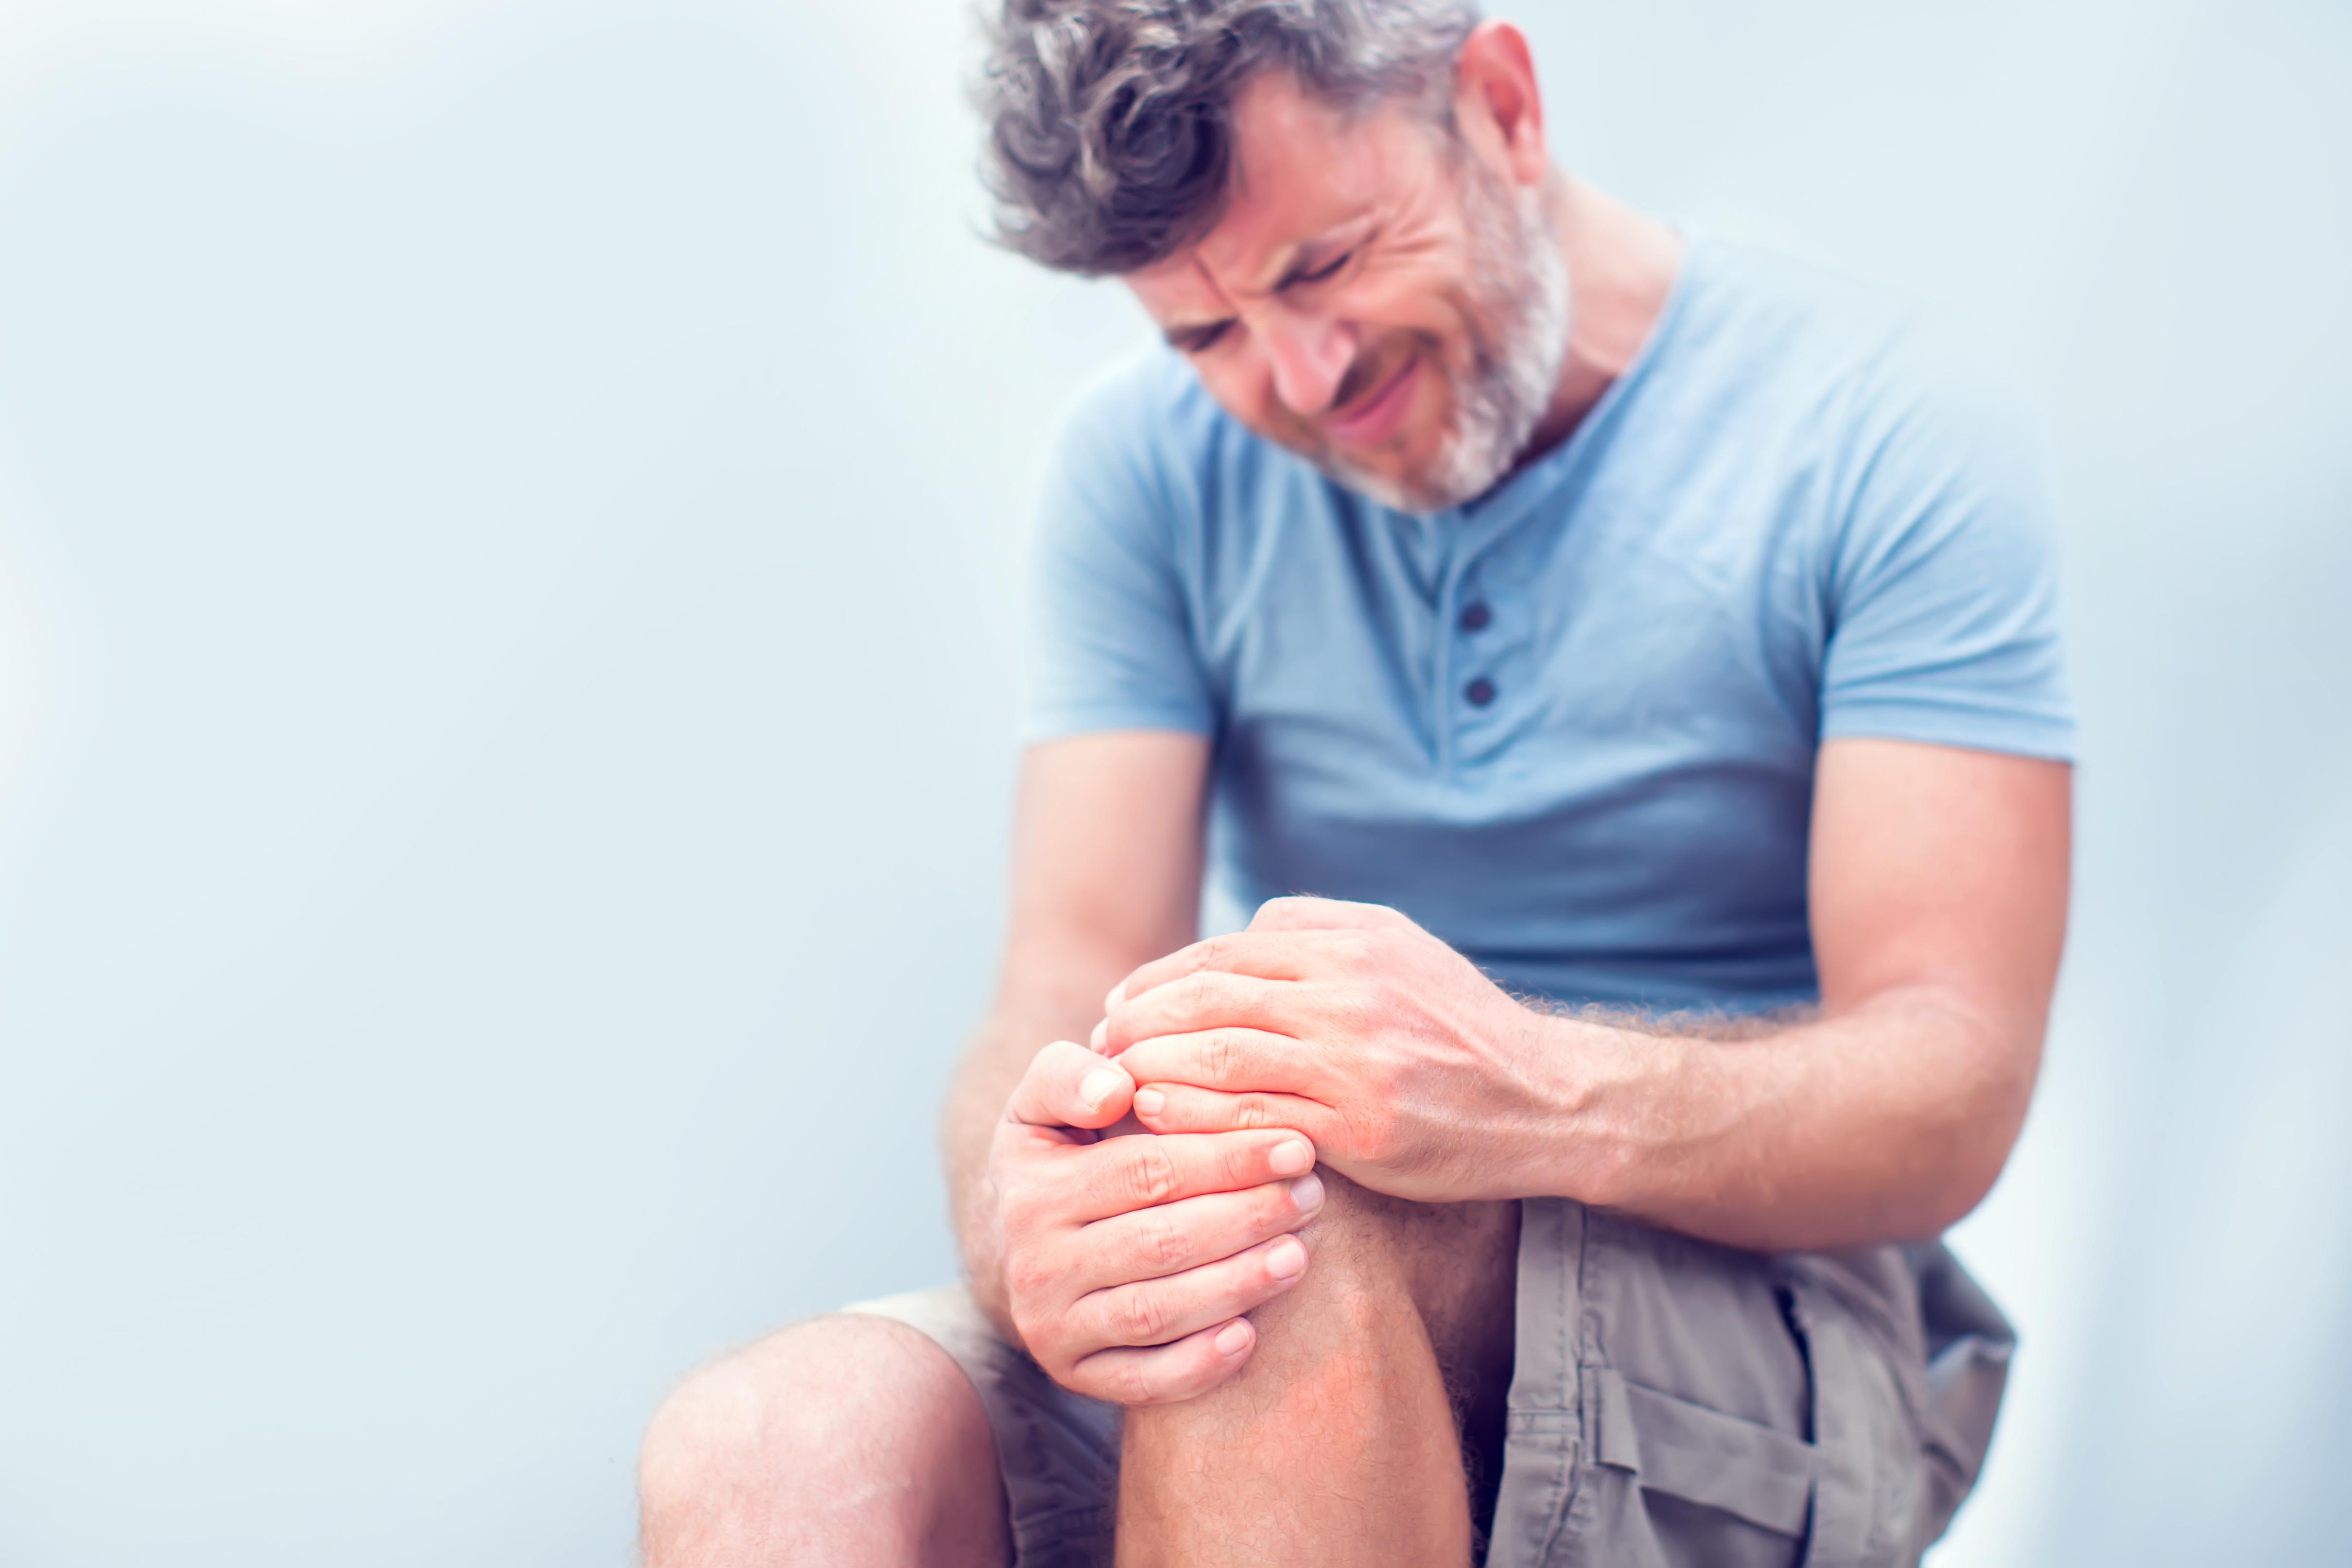 Knee Joint Pain